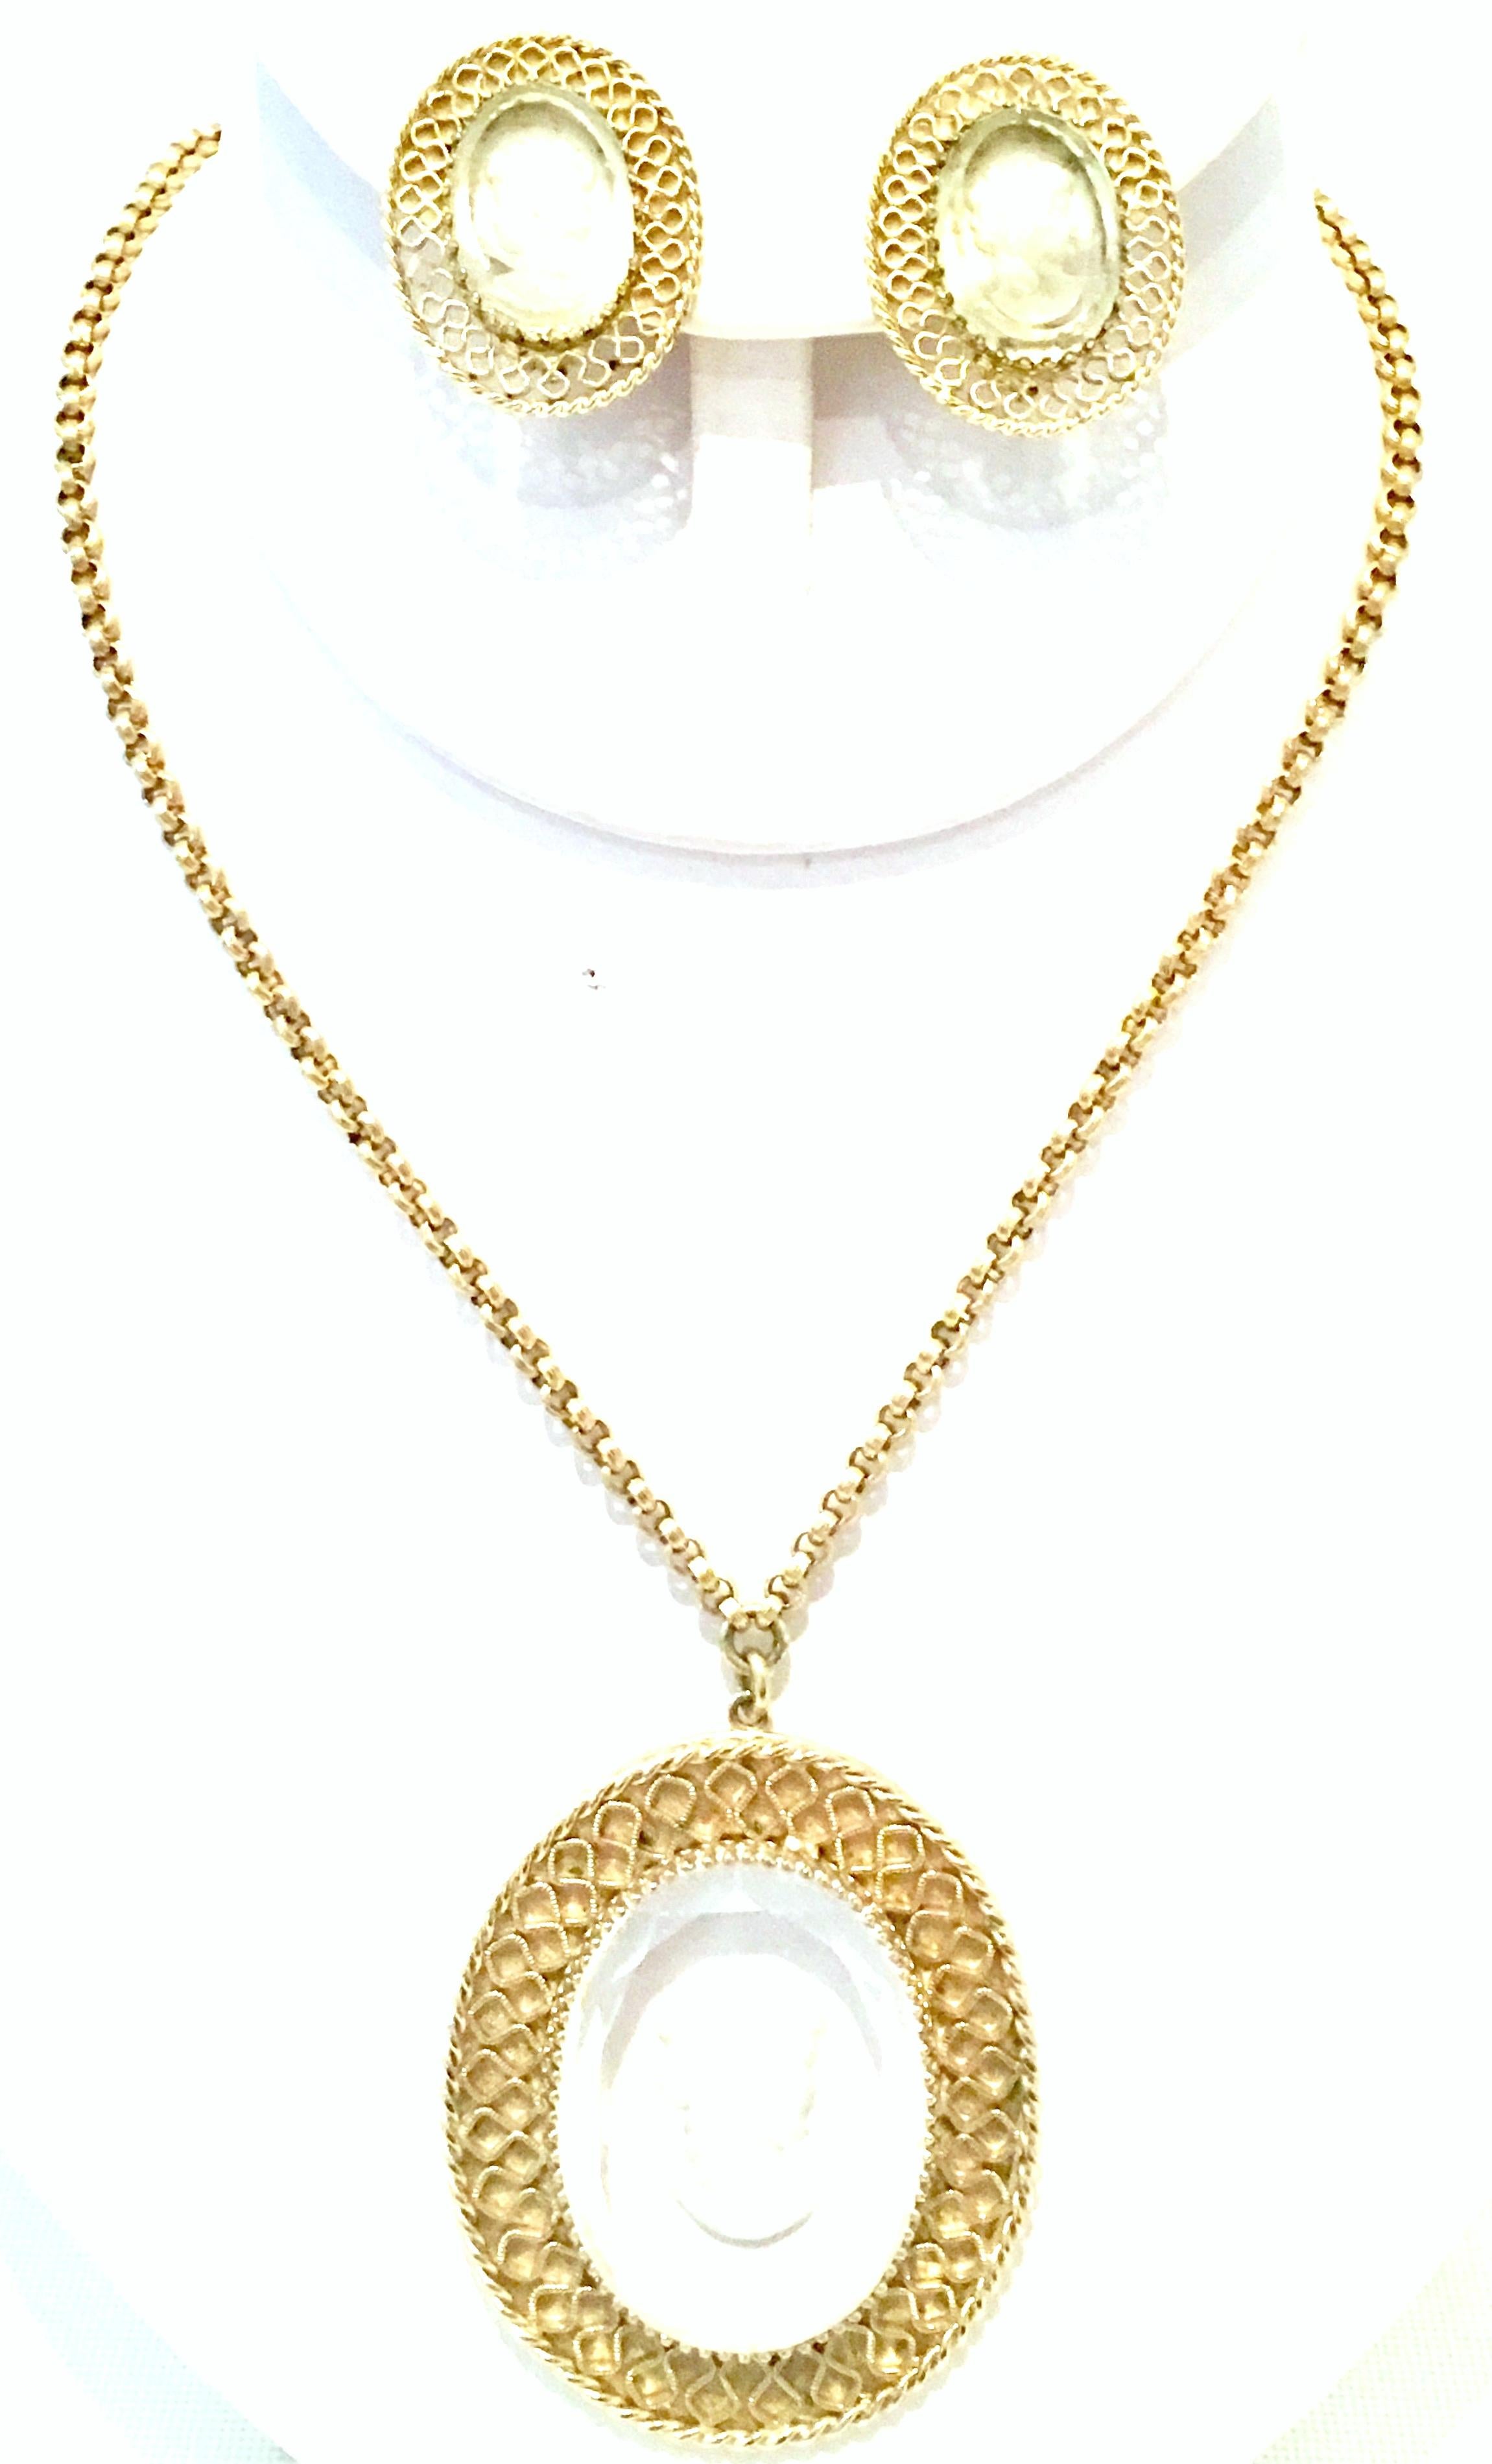 20th Century Gold Plate And Reverse Carved Art Glass Pendant Necklace And Earrings By, Whiting & Davis. This finely crafted three piece set features gold plate metal with fancy prong set translucent reverse carved glass cameo. The Clip style pair of